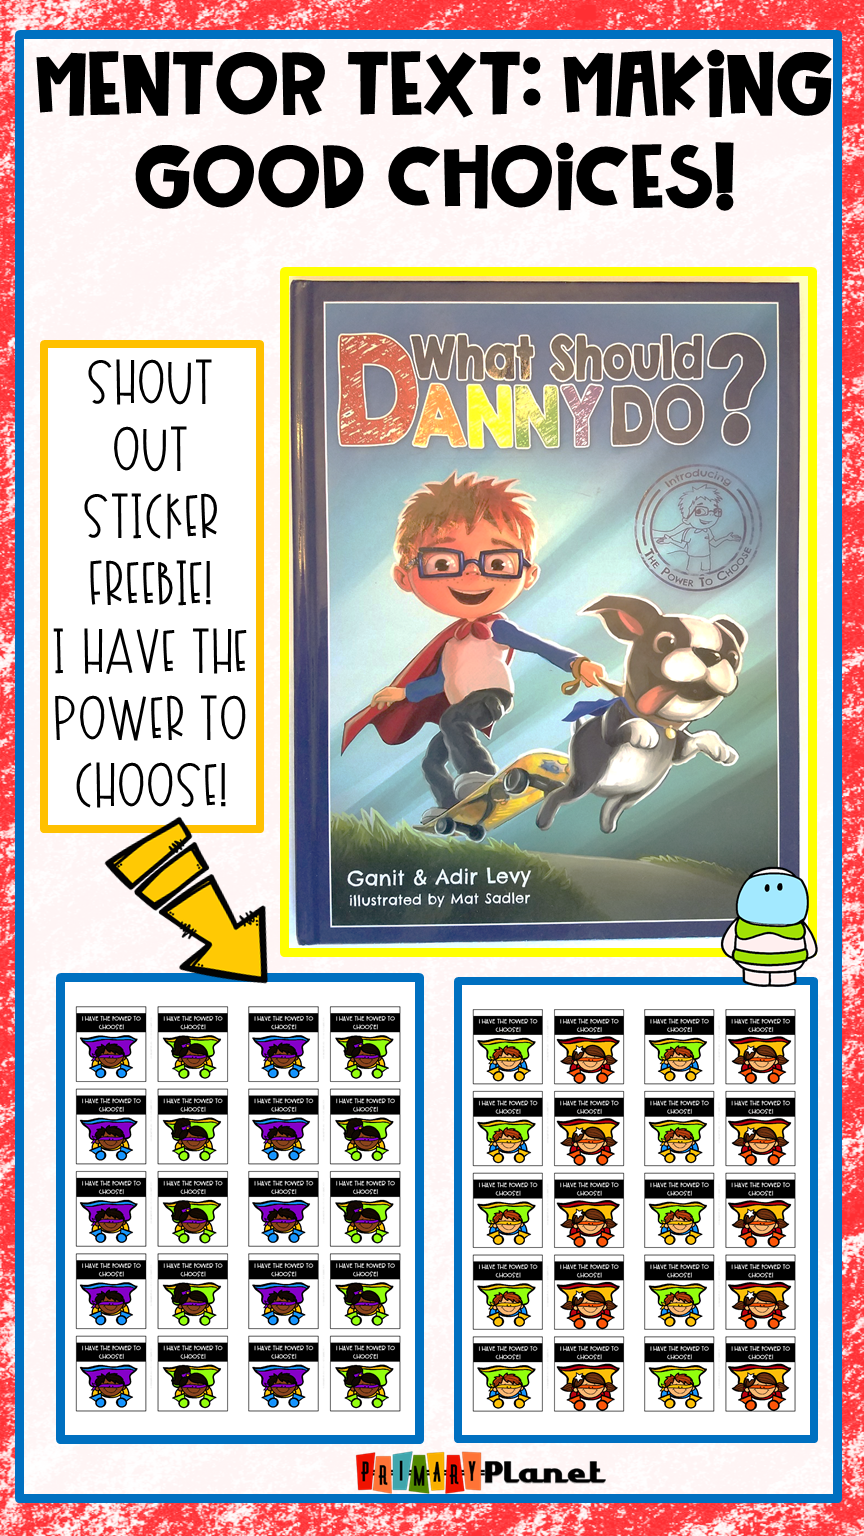 Mentor Text for Making Good Choices with a sticker freebie!  What Should Danny Do?